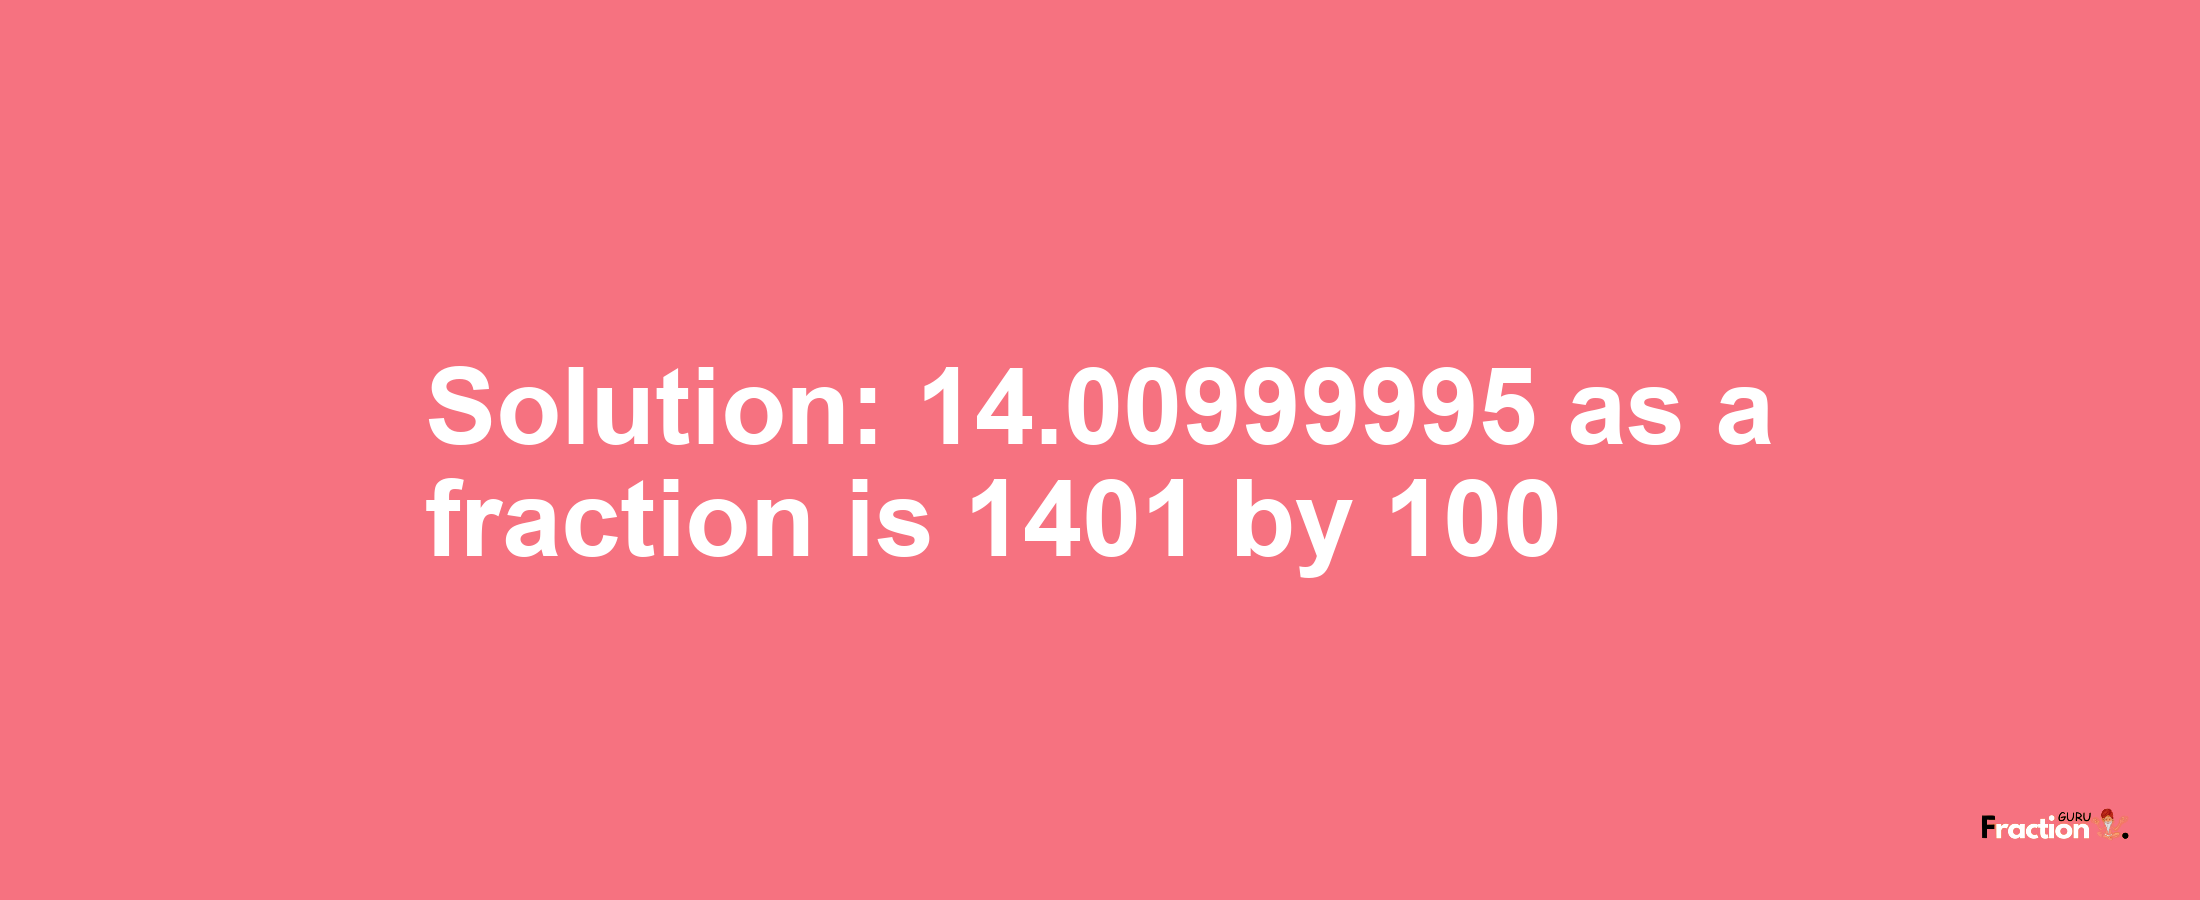 Solution:14.00999995 as a fraction is 1401/100